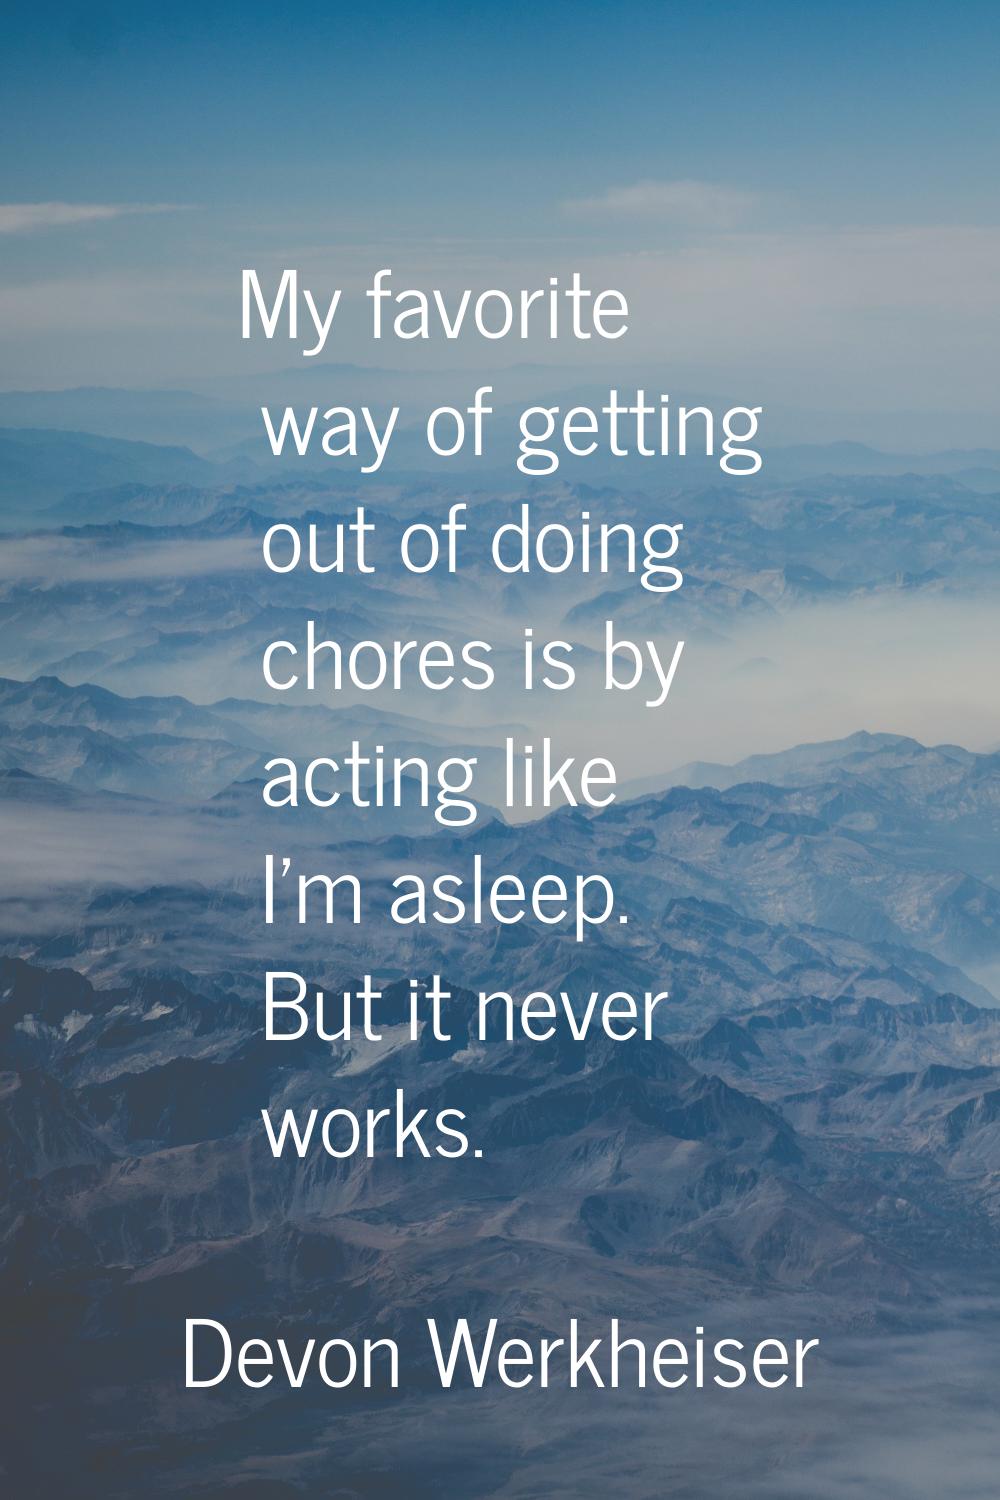 My favorite way of getting out of doing chores is by acting like I'm asleep. But it never works.